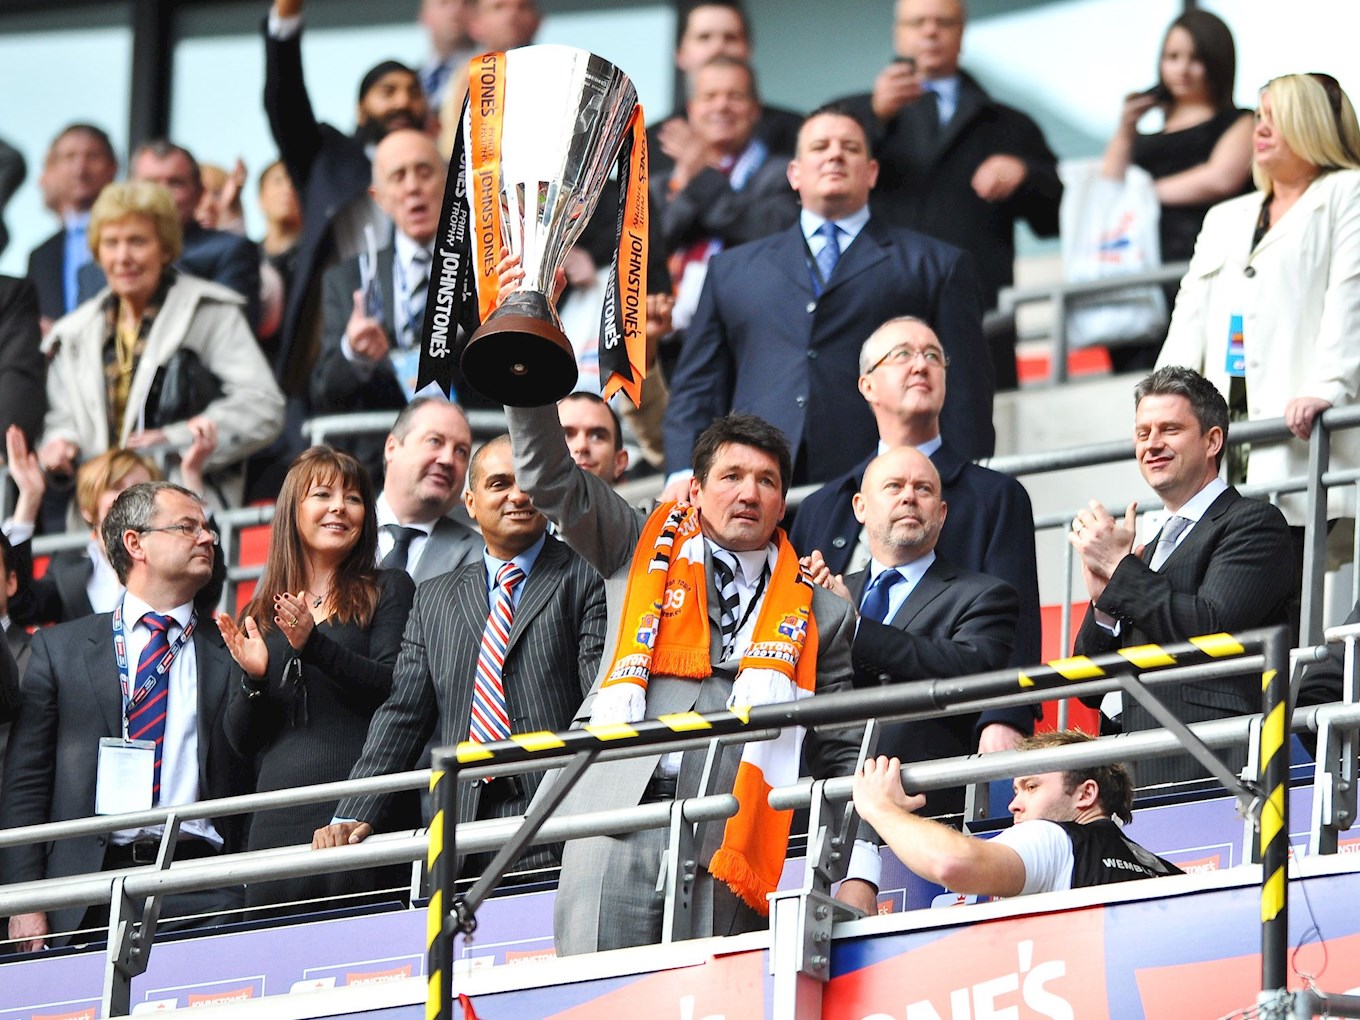 Mick Harford lifting the Johnstone's Paint Trophy at Wembley in 2009.